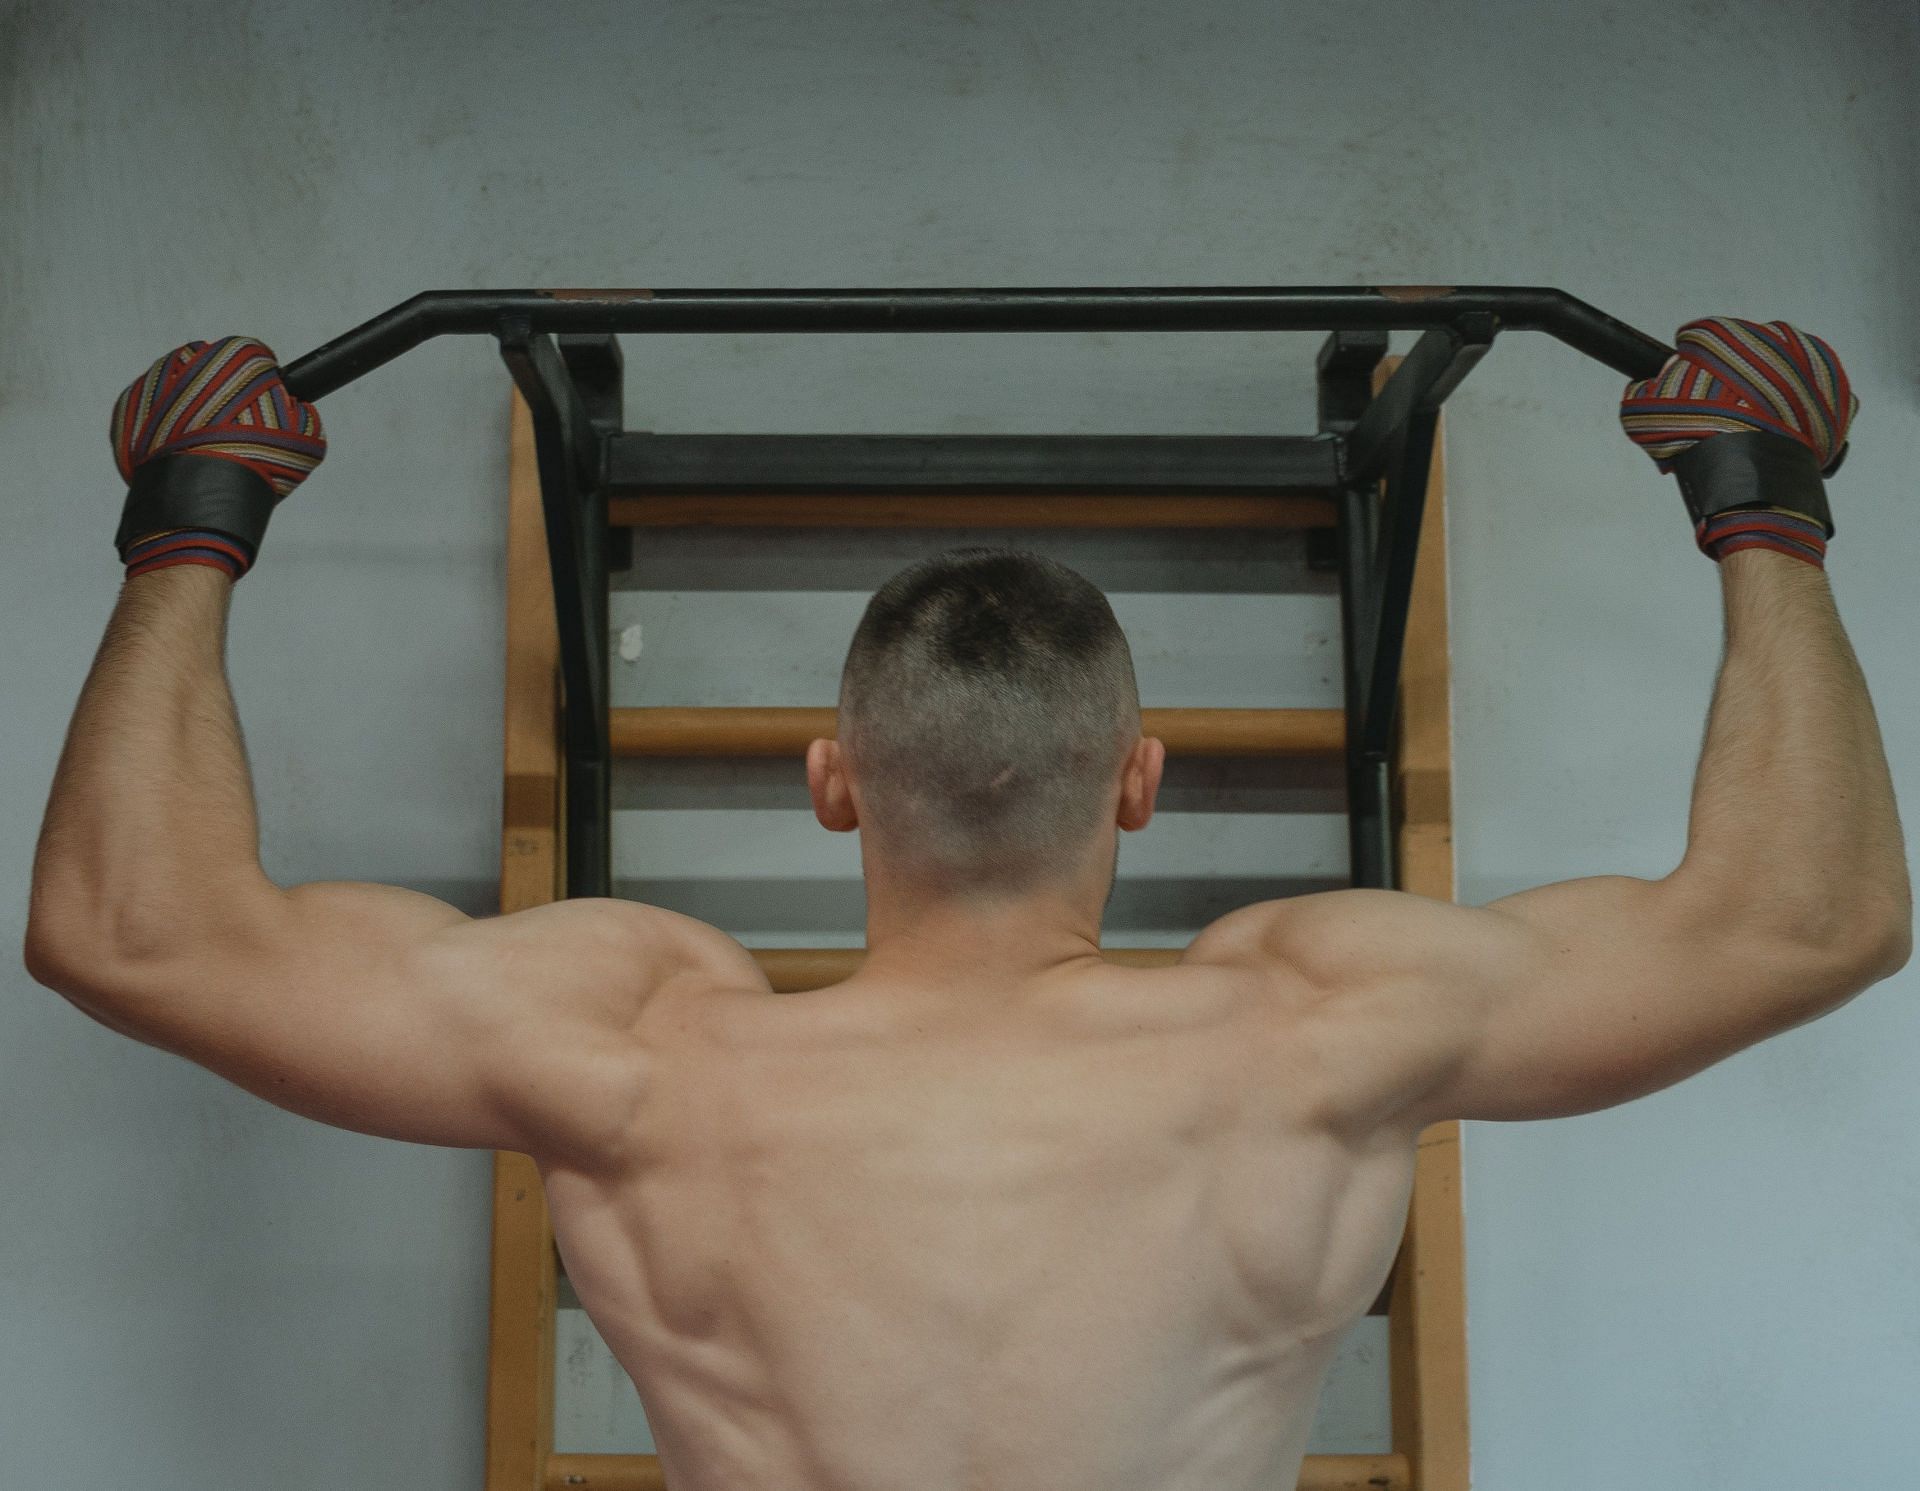 Maintaining proper form throughout the exercise is essential for optimizing your pull-up performance. (Tima Miroshnichenko/ Pexels)